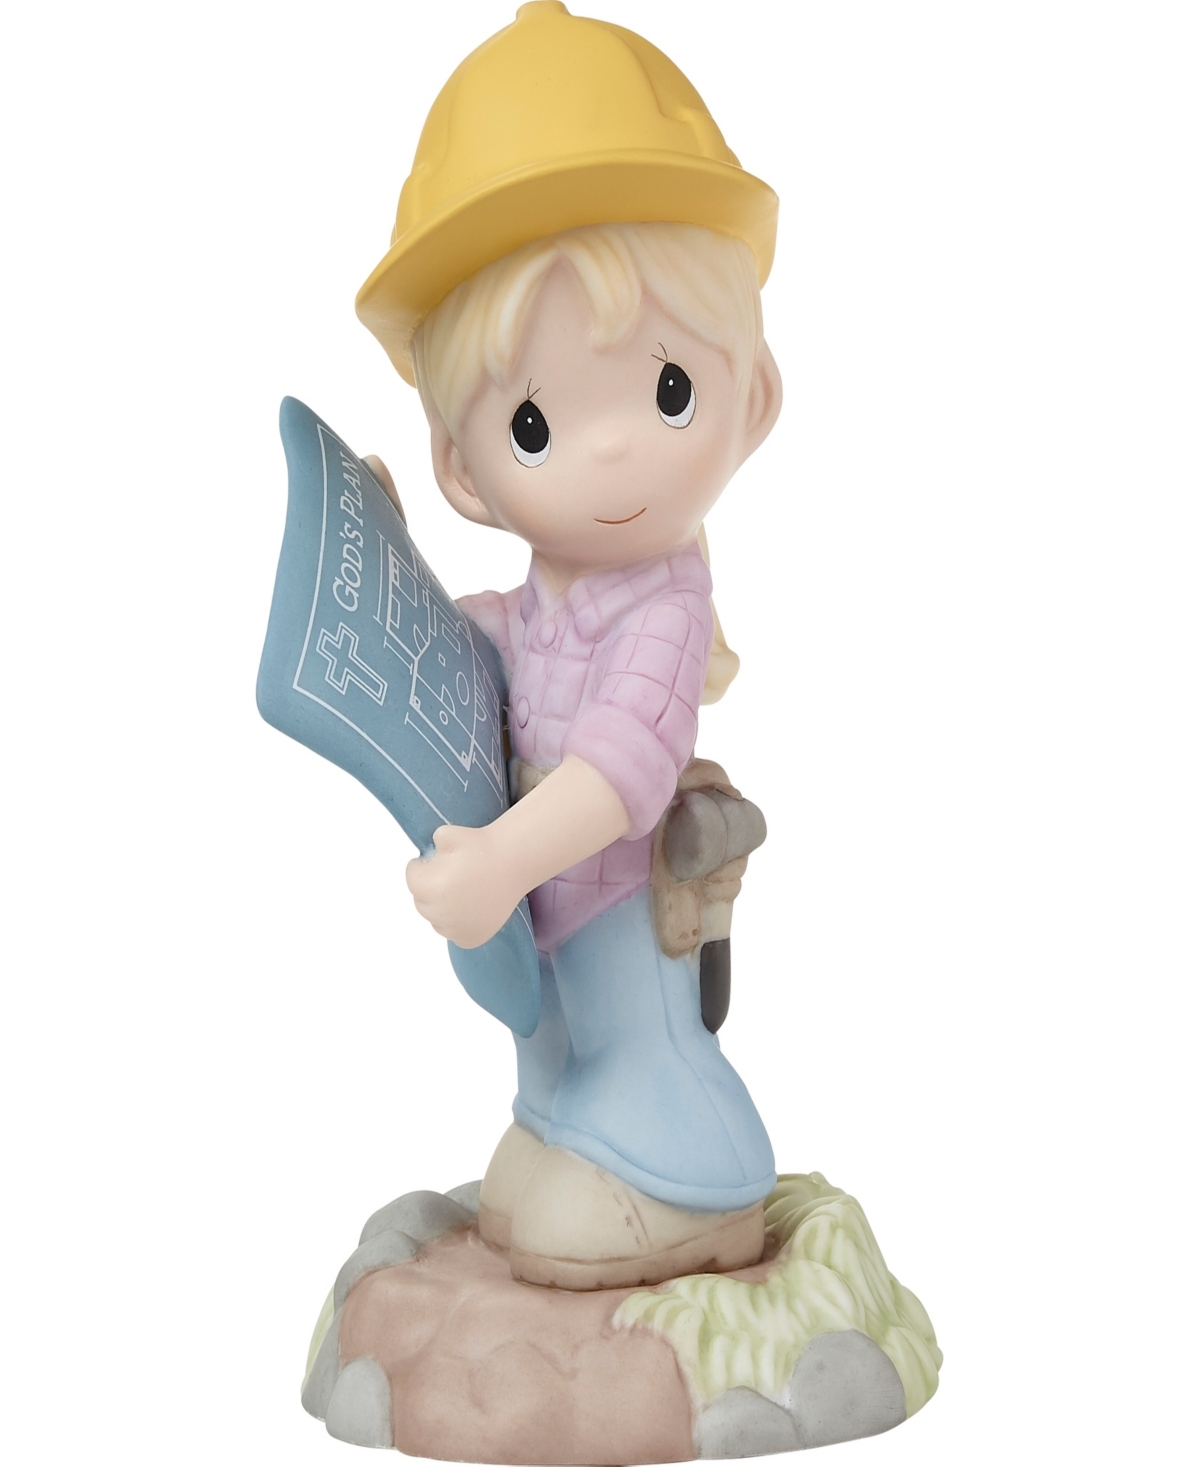 Precious Moments 222023 Trust In God's Plan Blonde Bisque Porcelain Figurine In Multicolored